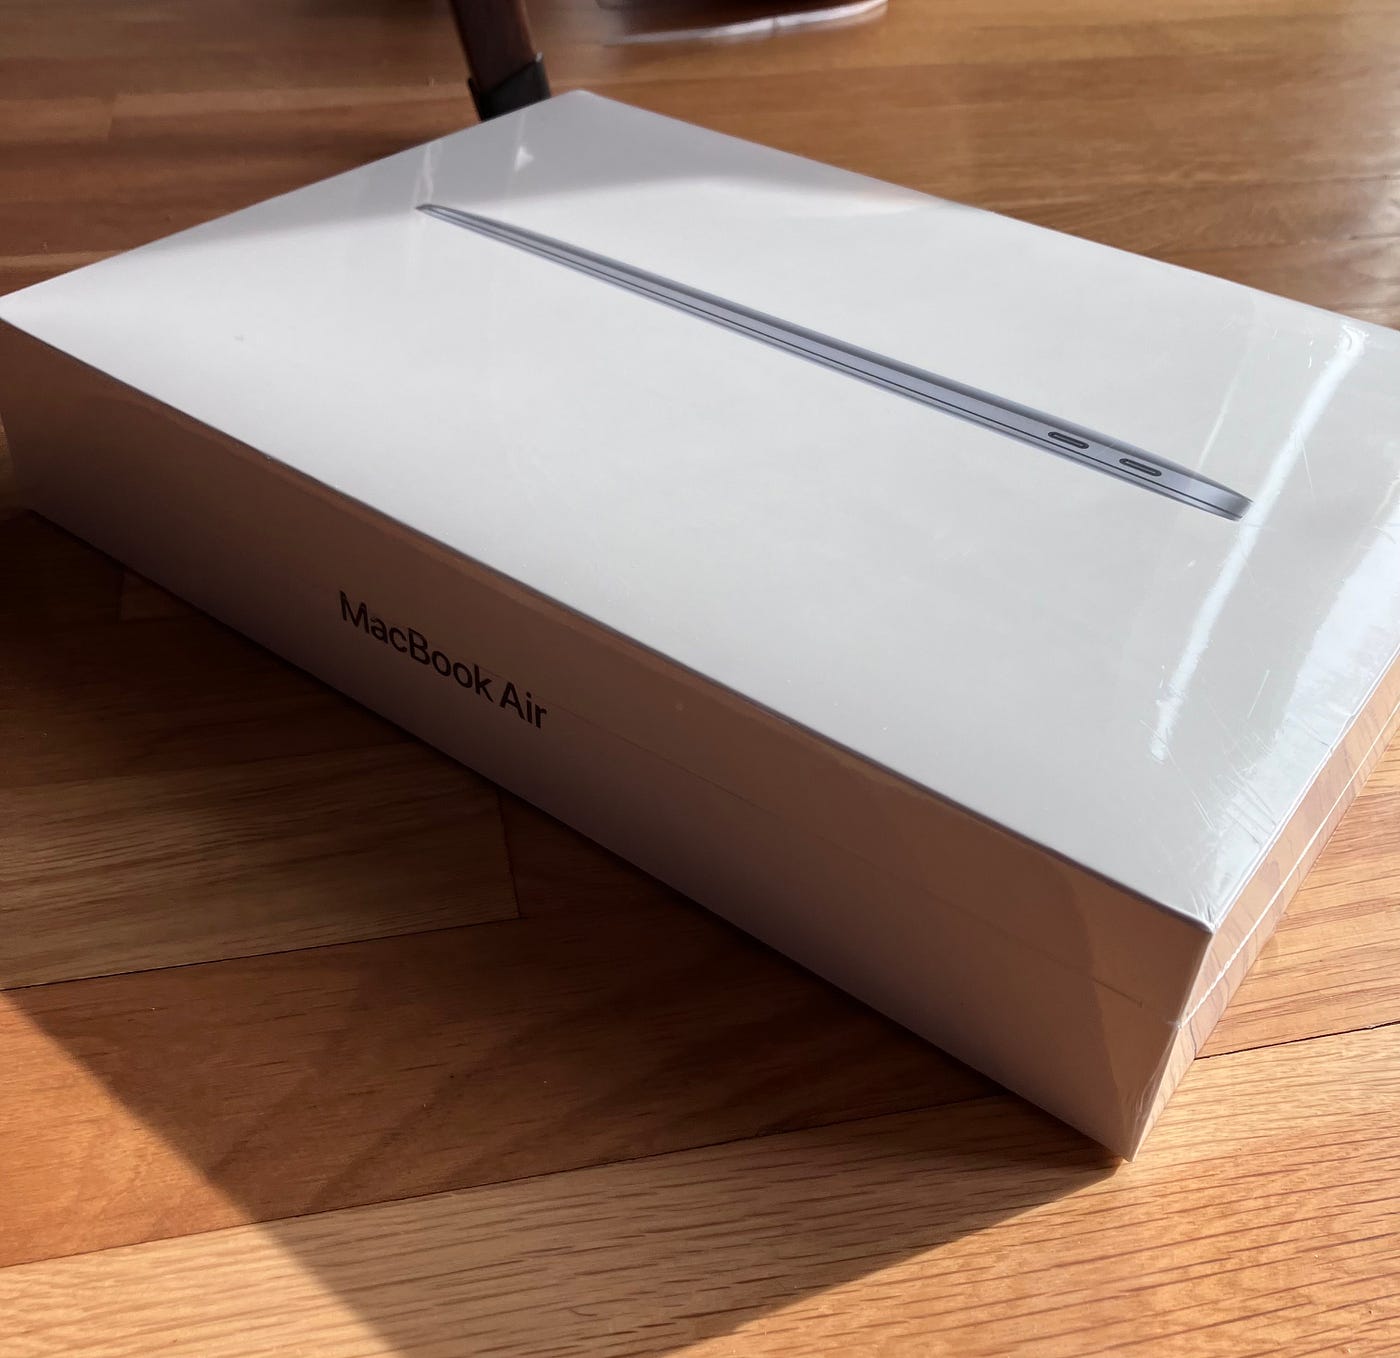 My MacBook Air M1 Unboxing Experience | by Jonathan | Medium